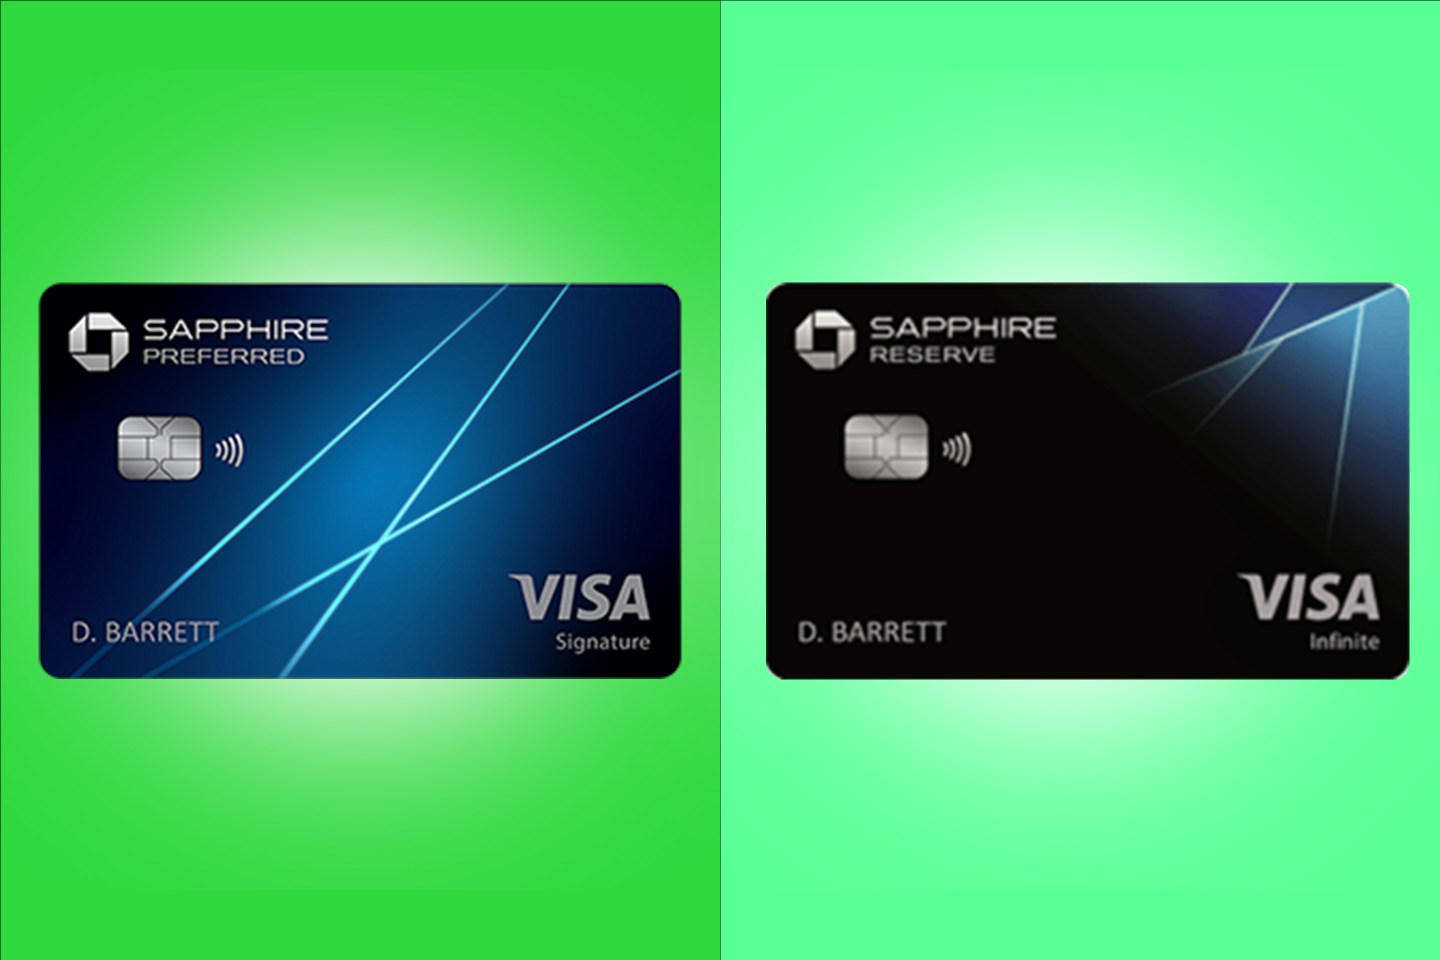 Photo of Chase Sapphire Reserve credit card and Sapphire Preferred credit card on a green background